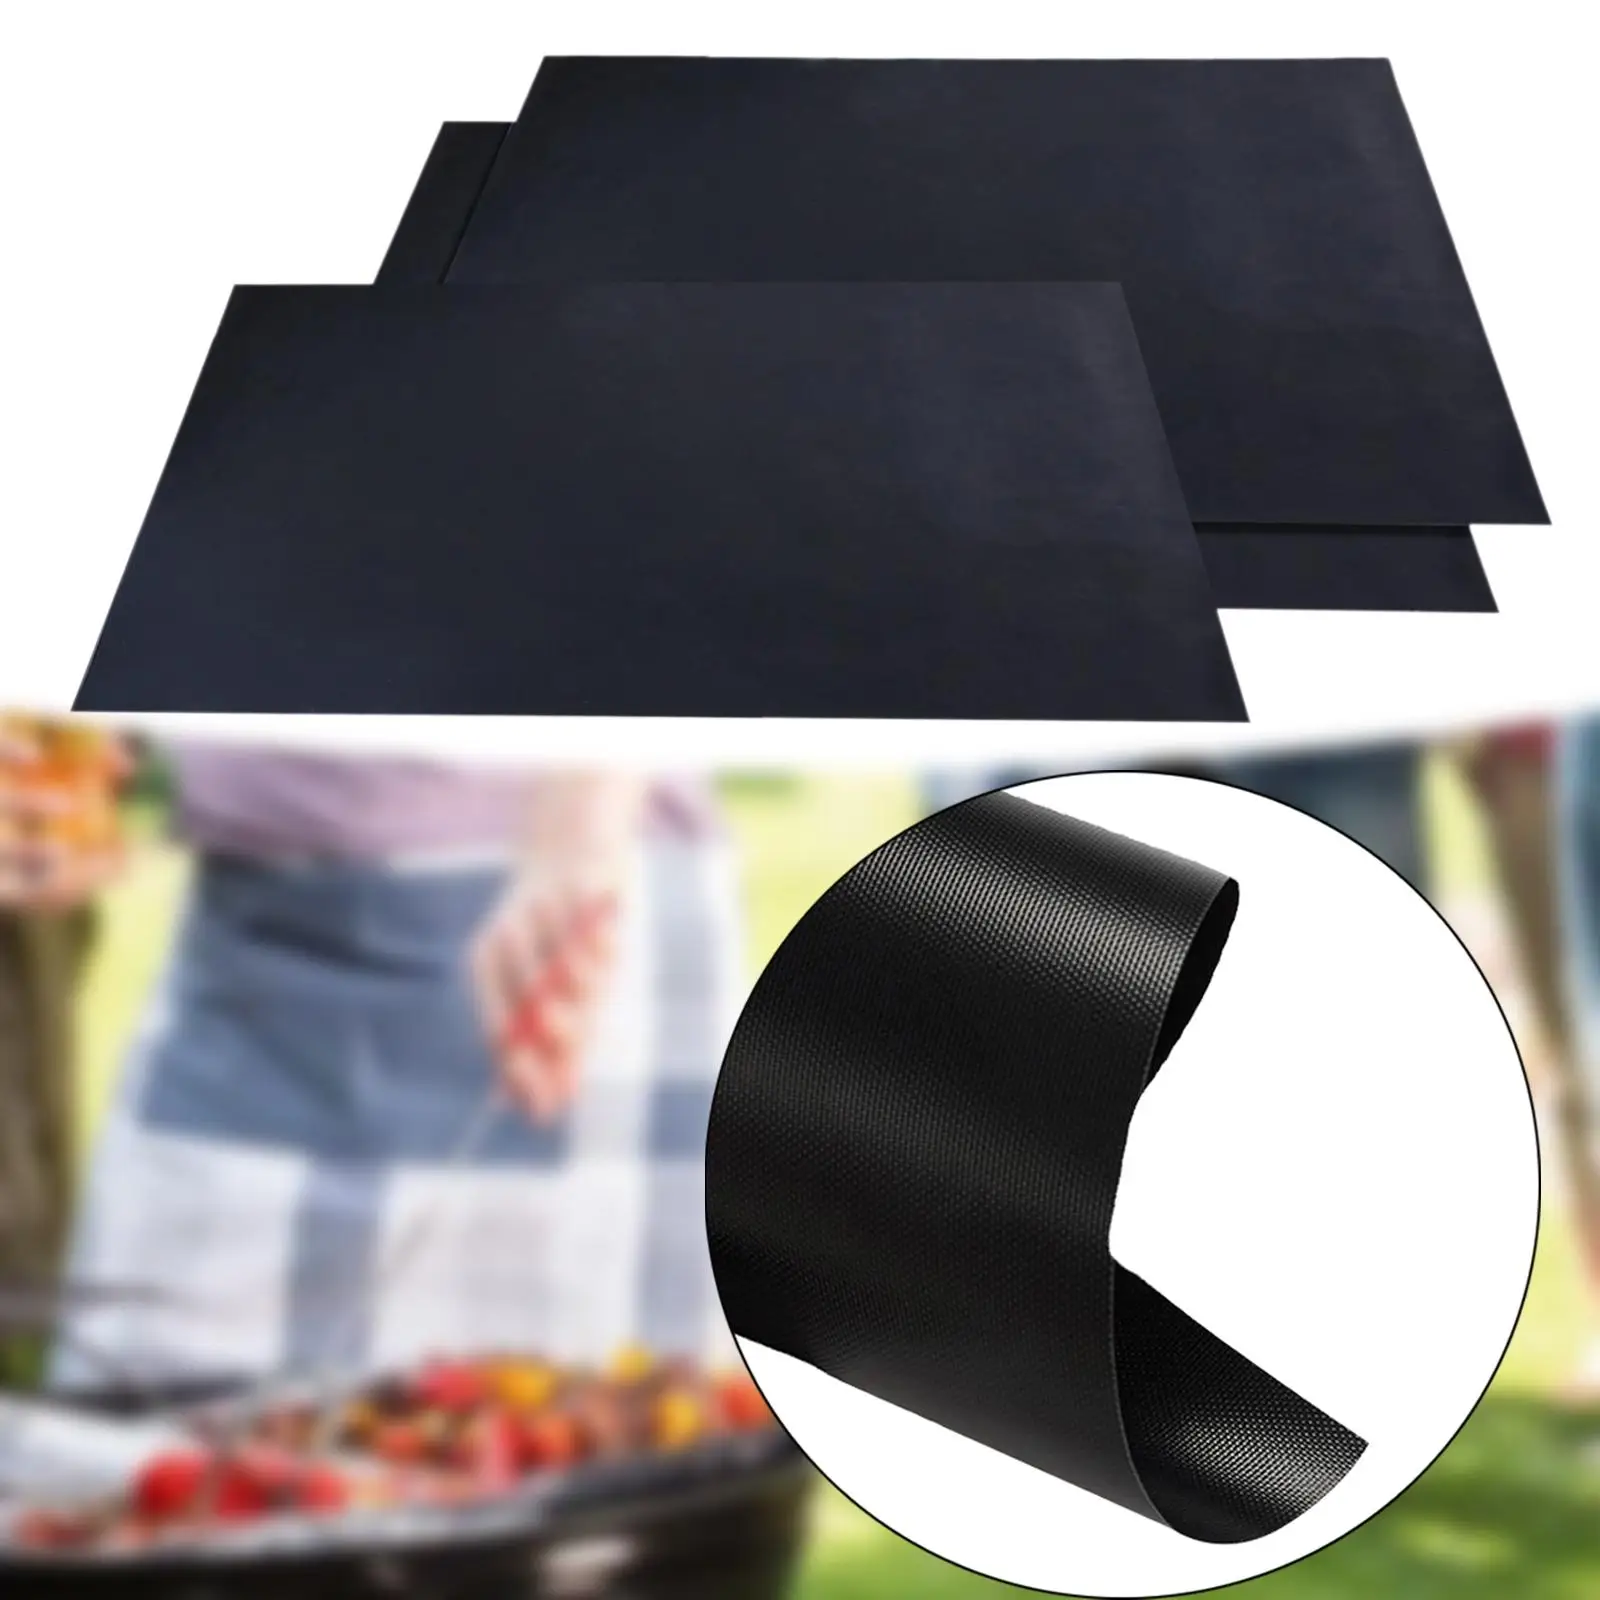 3Pcs Nonstick Baking Sheet Cookie Sheets Reusable Pastry Mat Heat Resistant Oven Liner for Park Outdoor Kitchen Camping Cooking